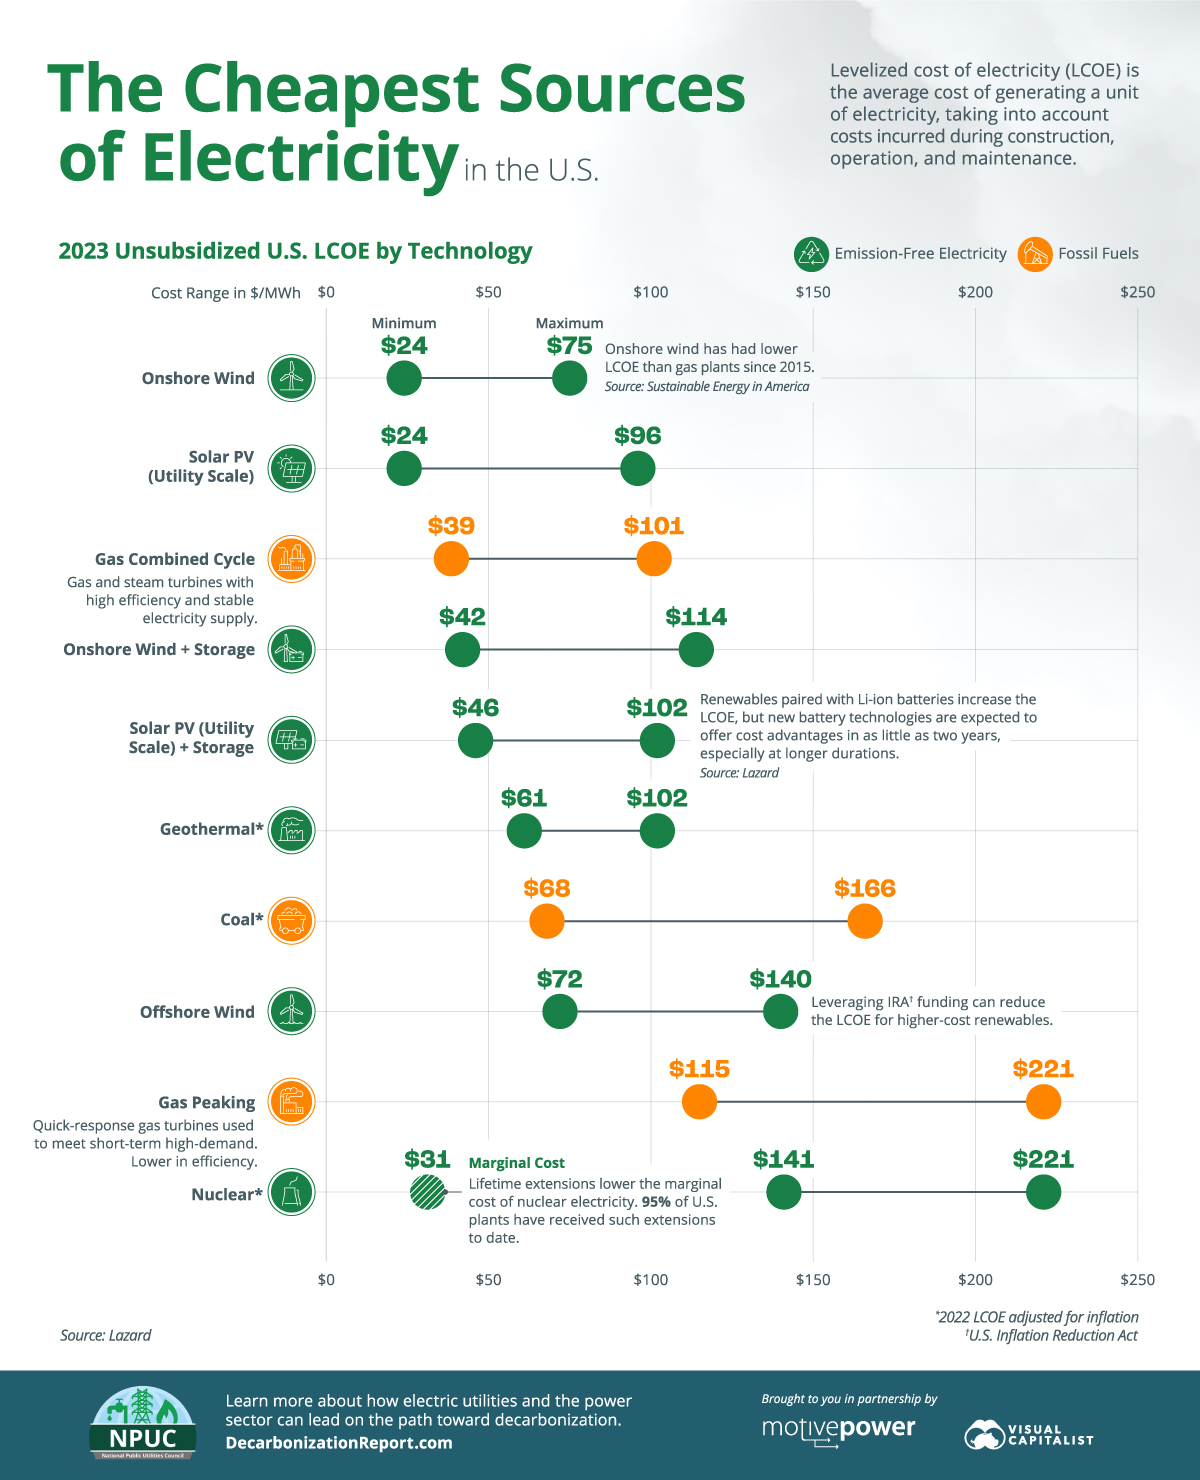 Ranked: The Cheapest Sources of Electricity in the U.S.